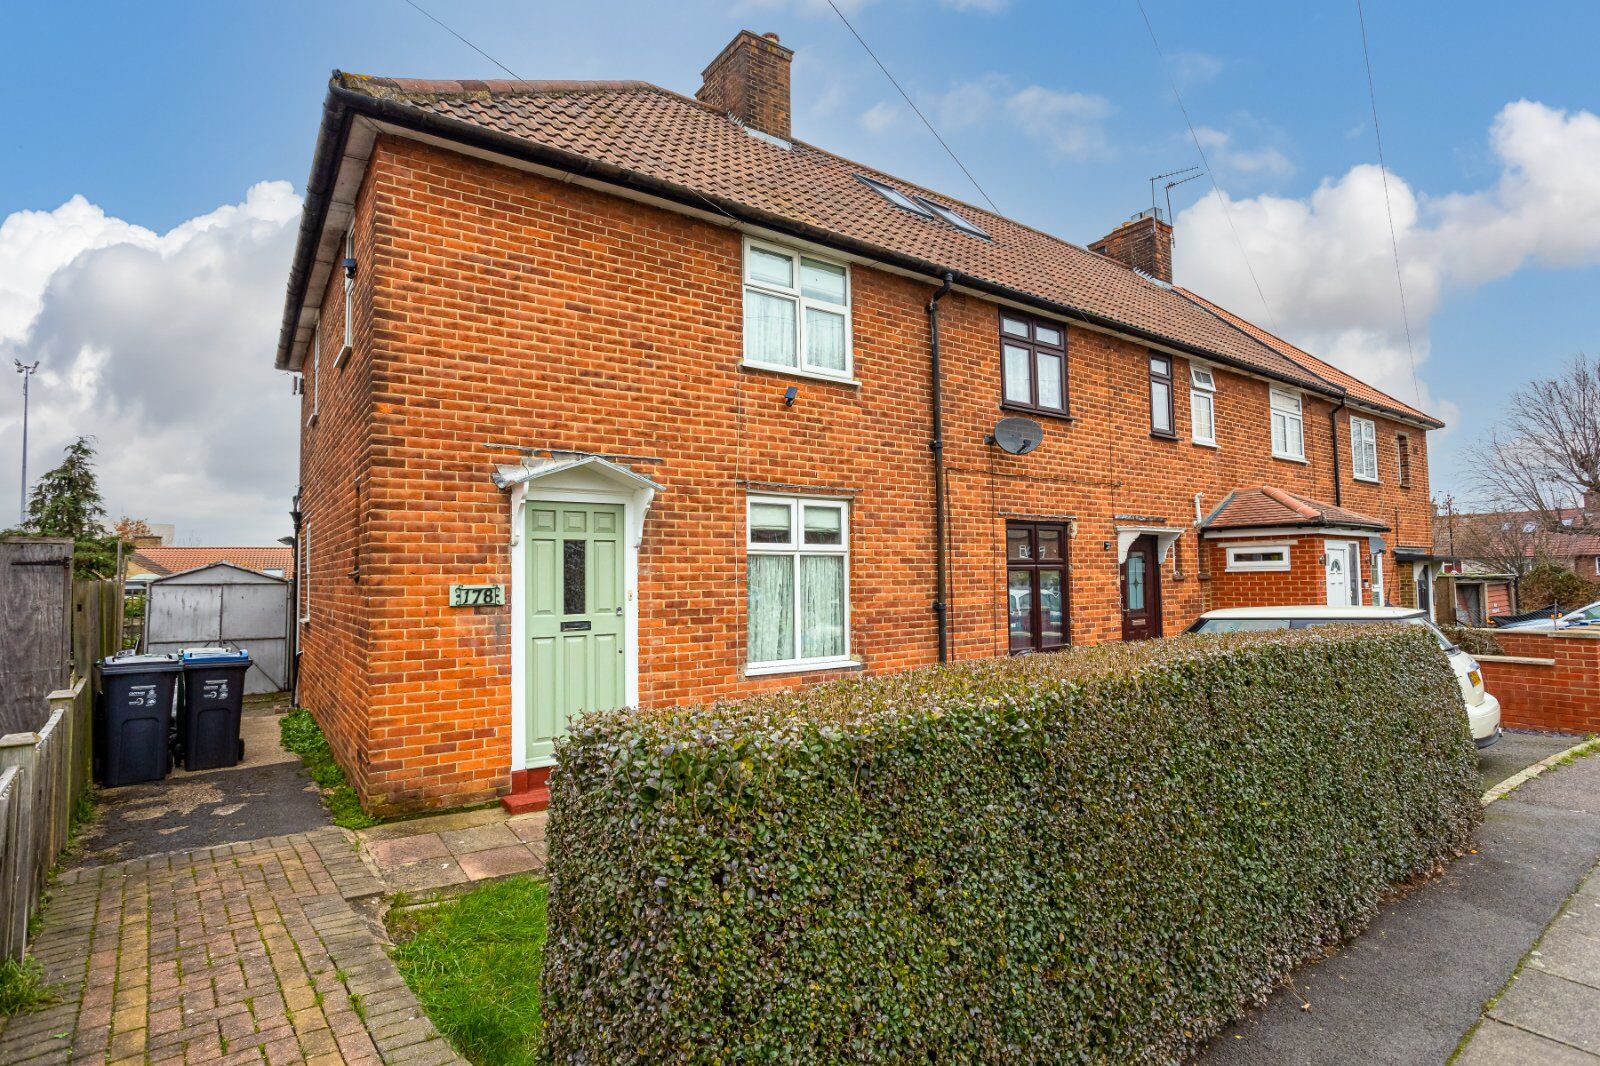 3 bedroom end terraced house for sale Abbotsbury Road, Morden, SM4, main image